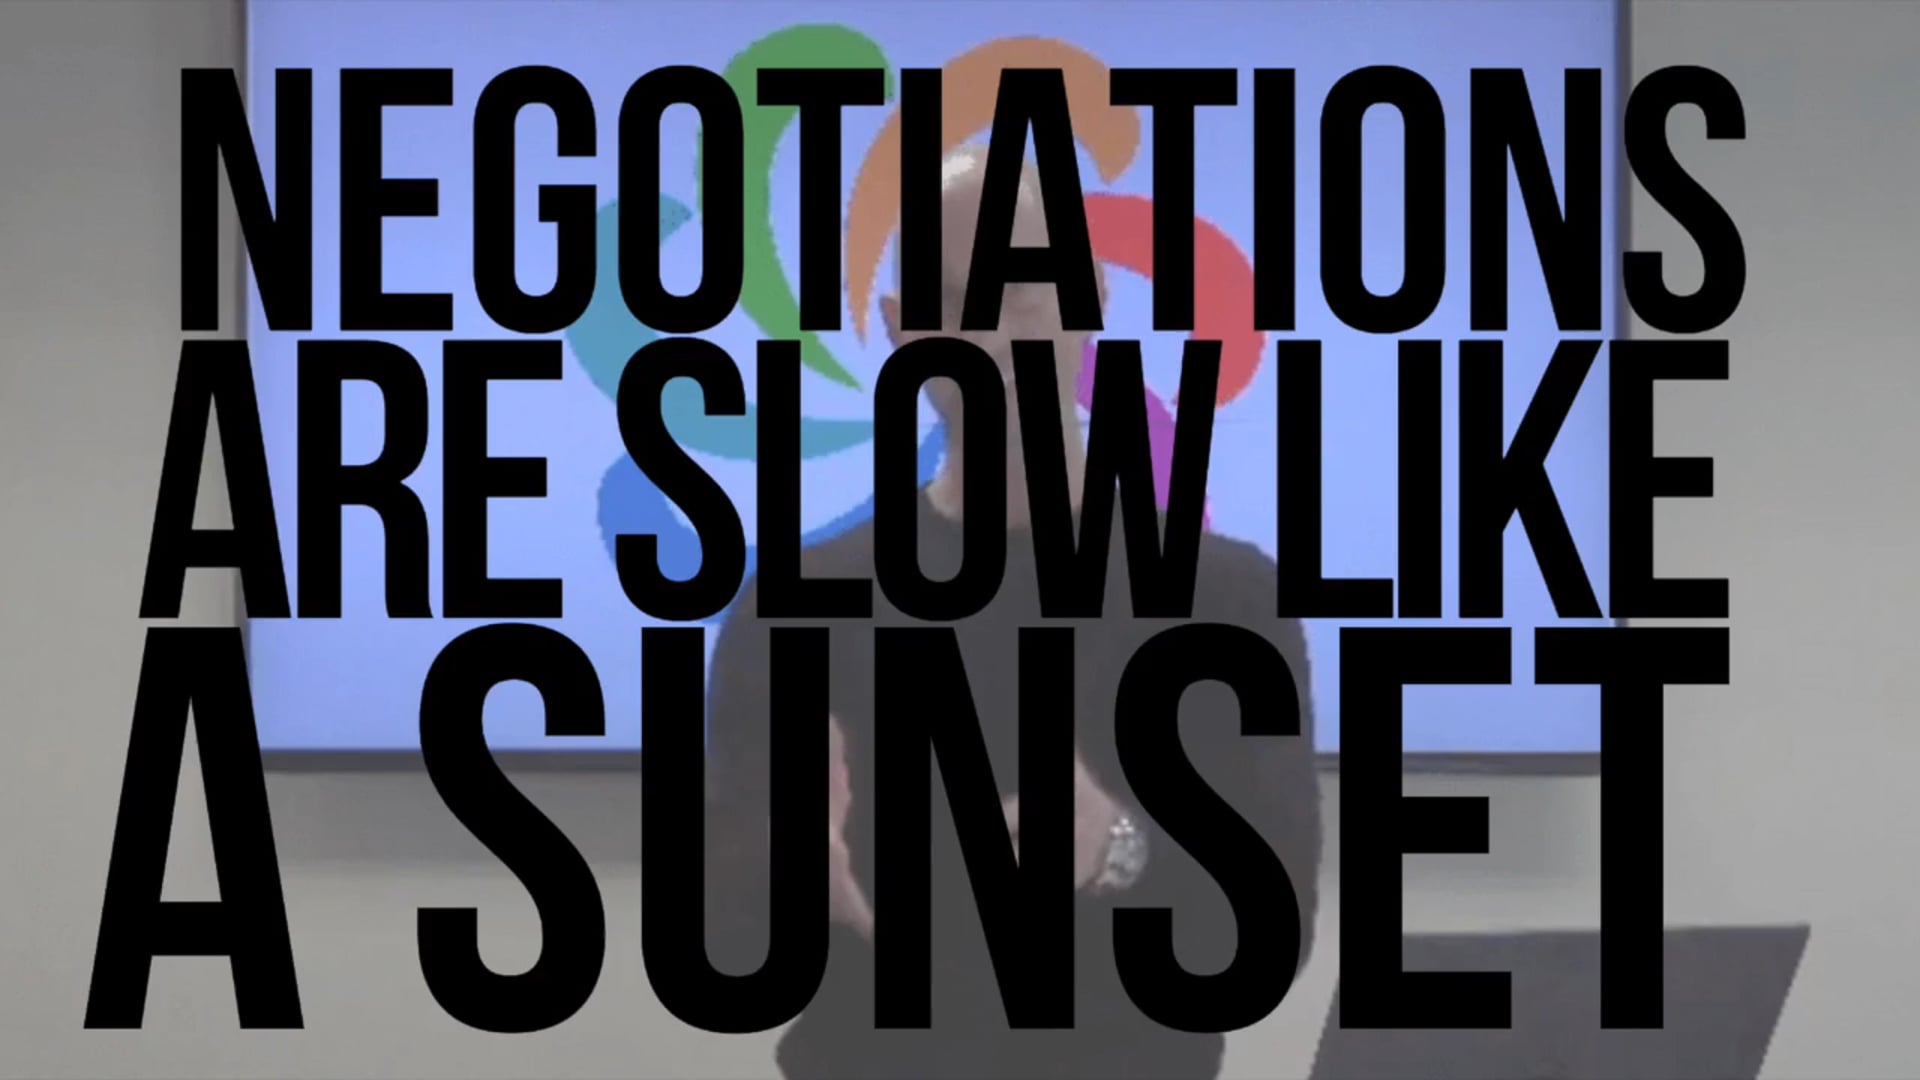 Negotiations Are Slow Like A Sunset